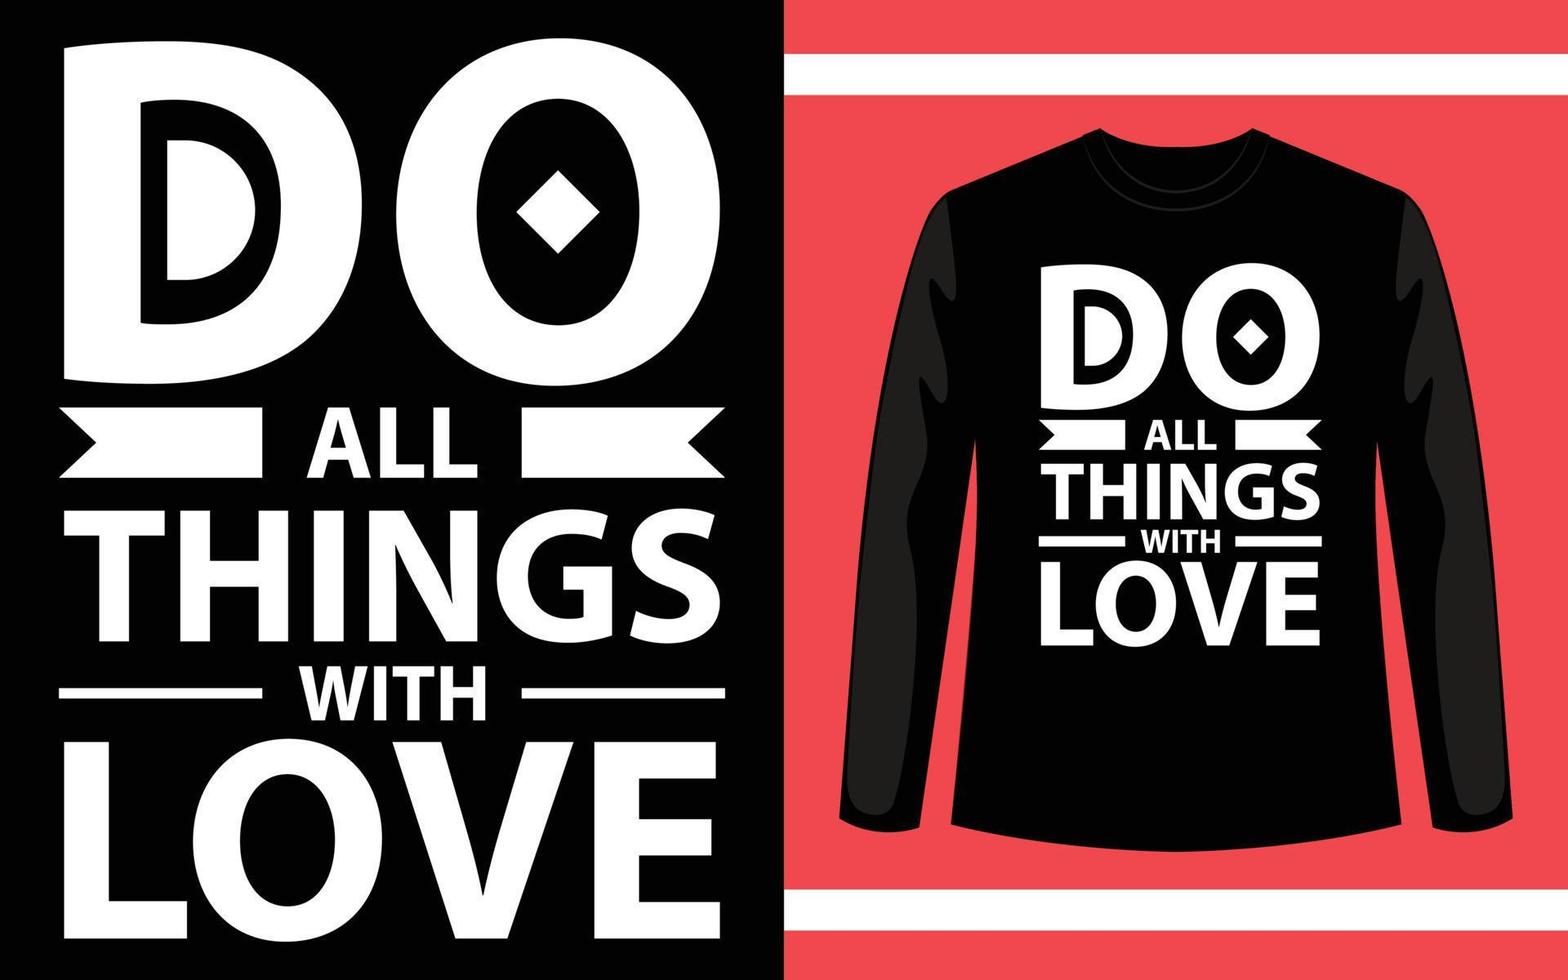 Do all things with love typography motivation quote design for t shirt or merchandise vector